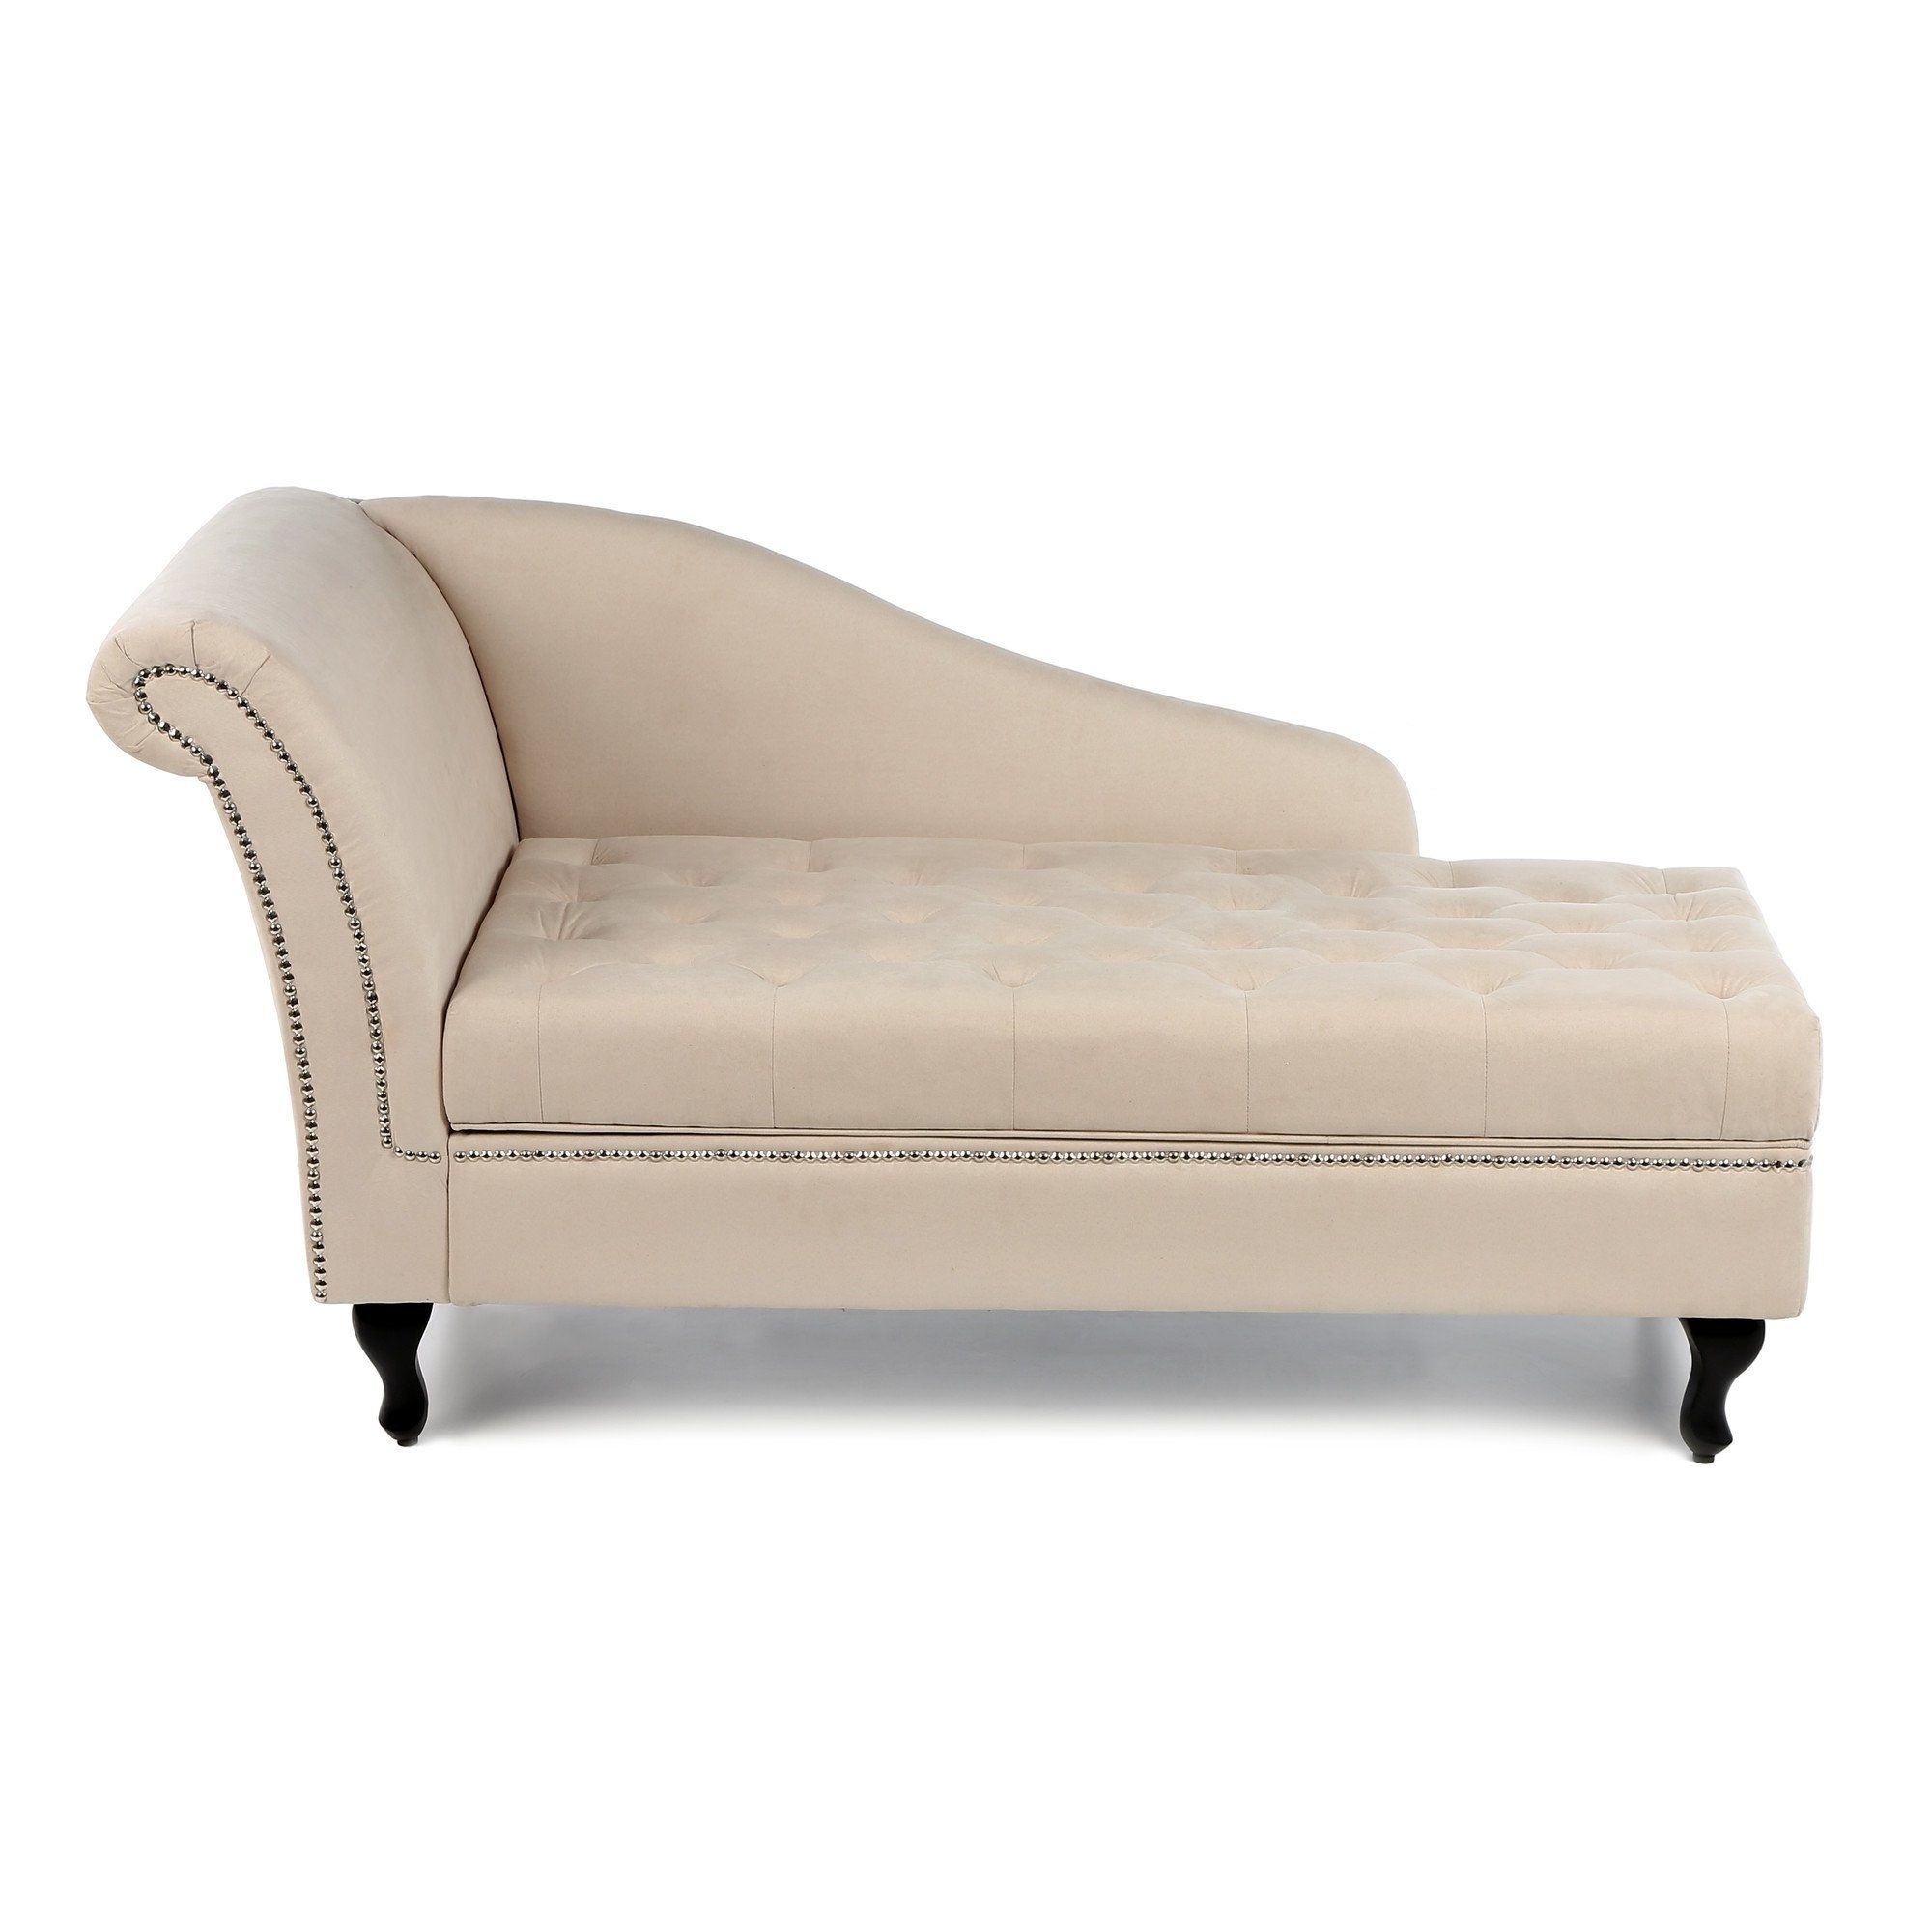 Newest $300 Amazon – Storage Chaise Lounge Luxurious Tufted Classic With Regard To Chaise Lounge Chairs Under $ (View 3 of 15)